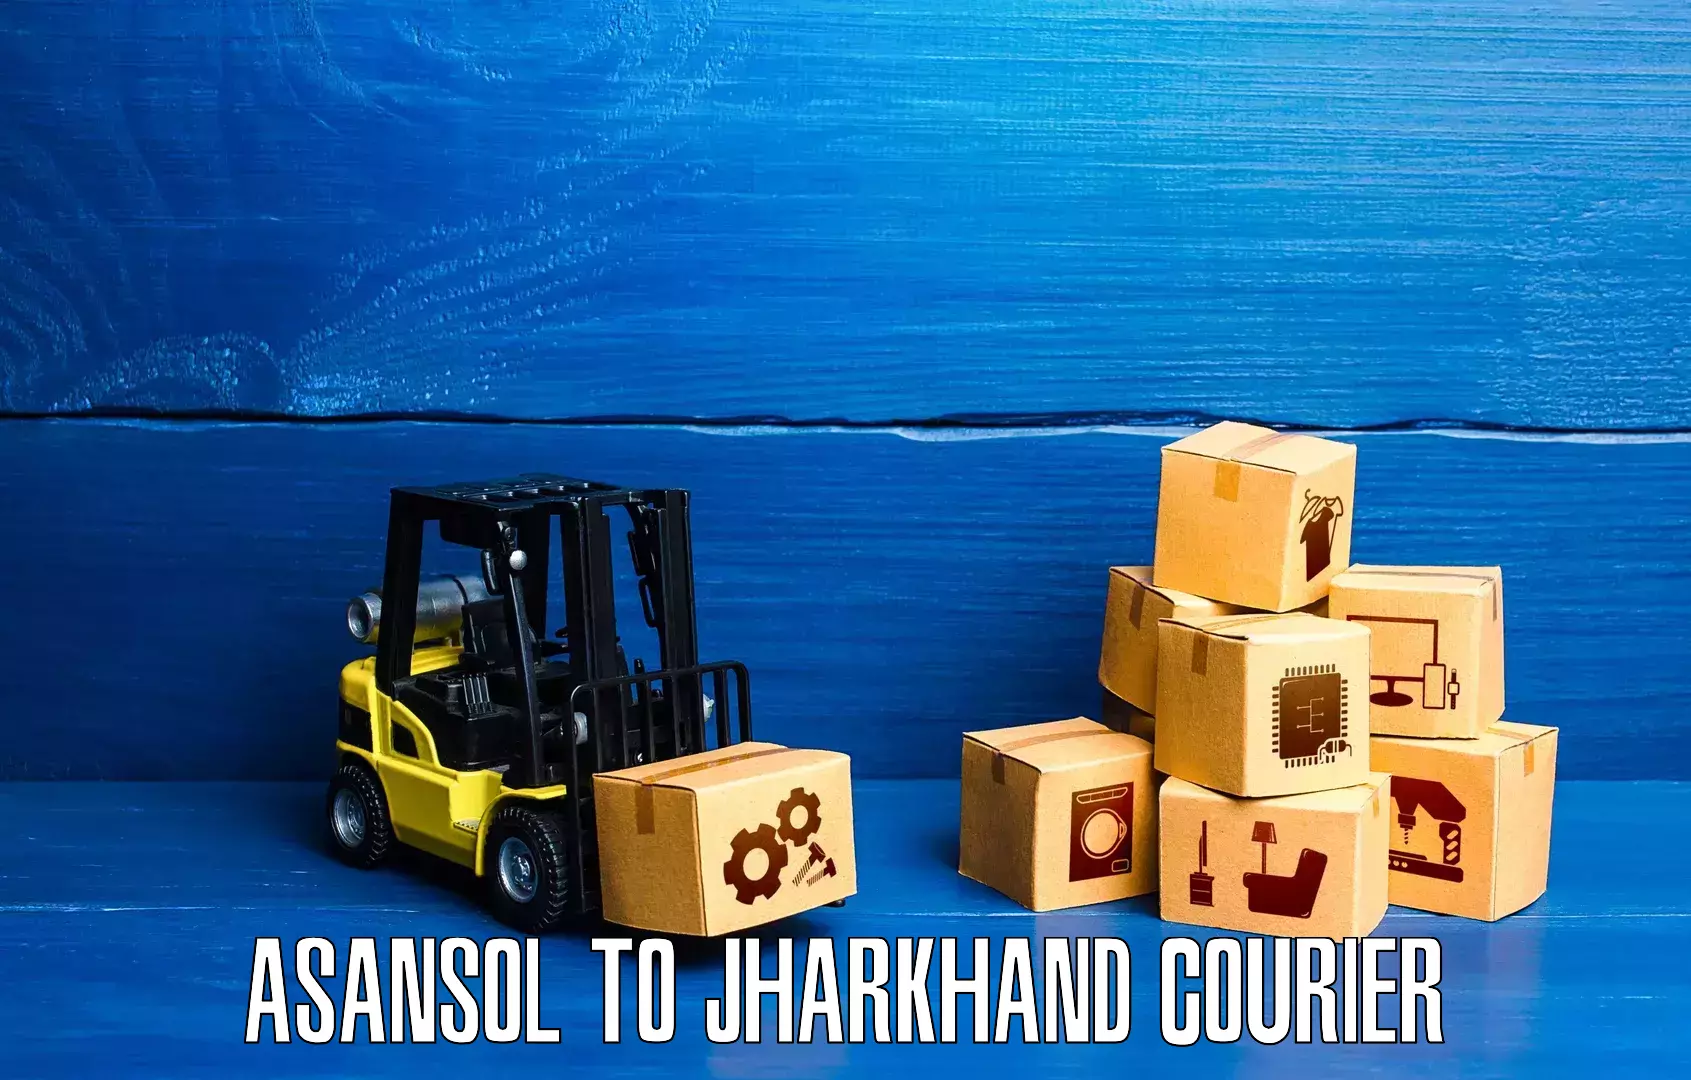 State-of-the-art courier technology Asansol to Jamshedpur